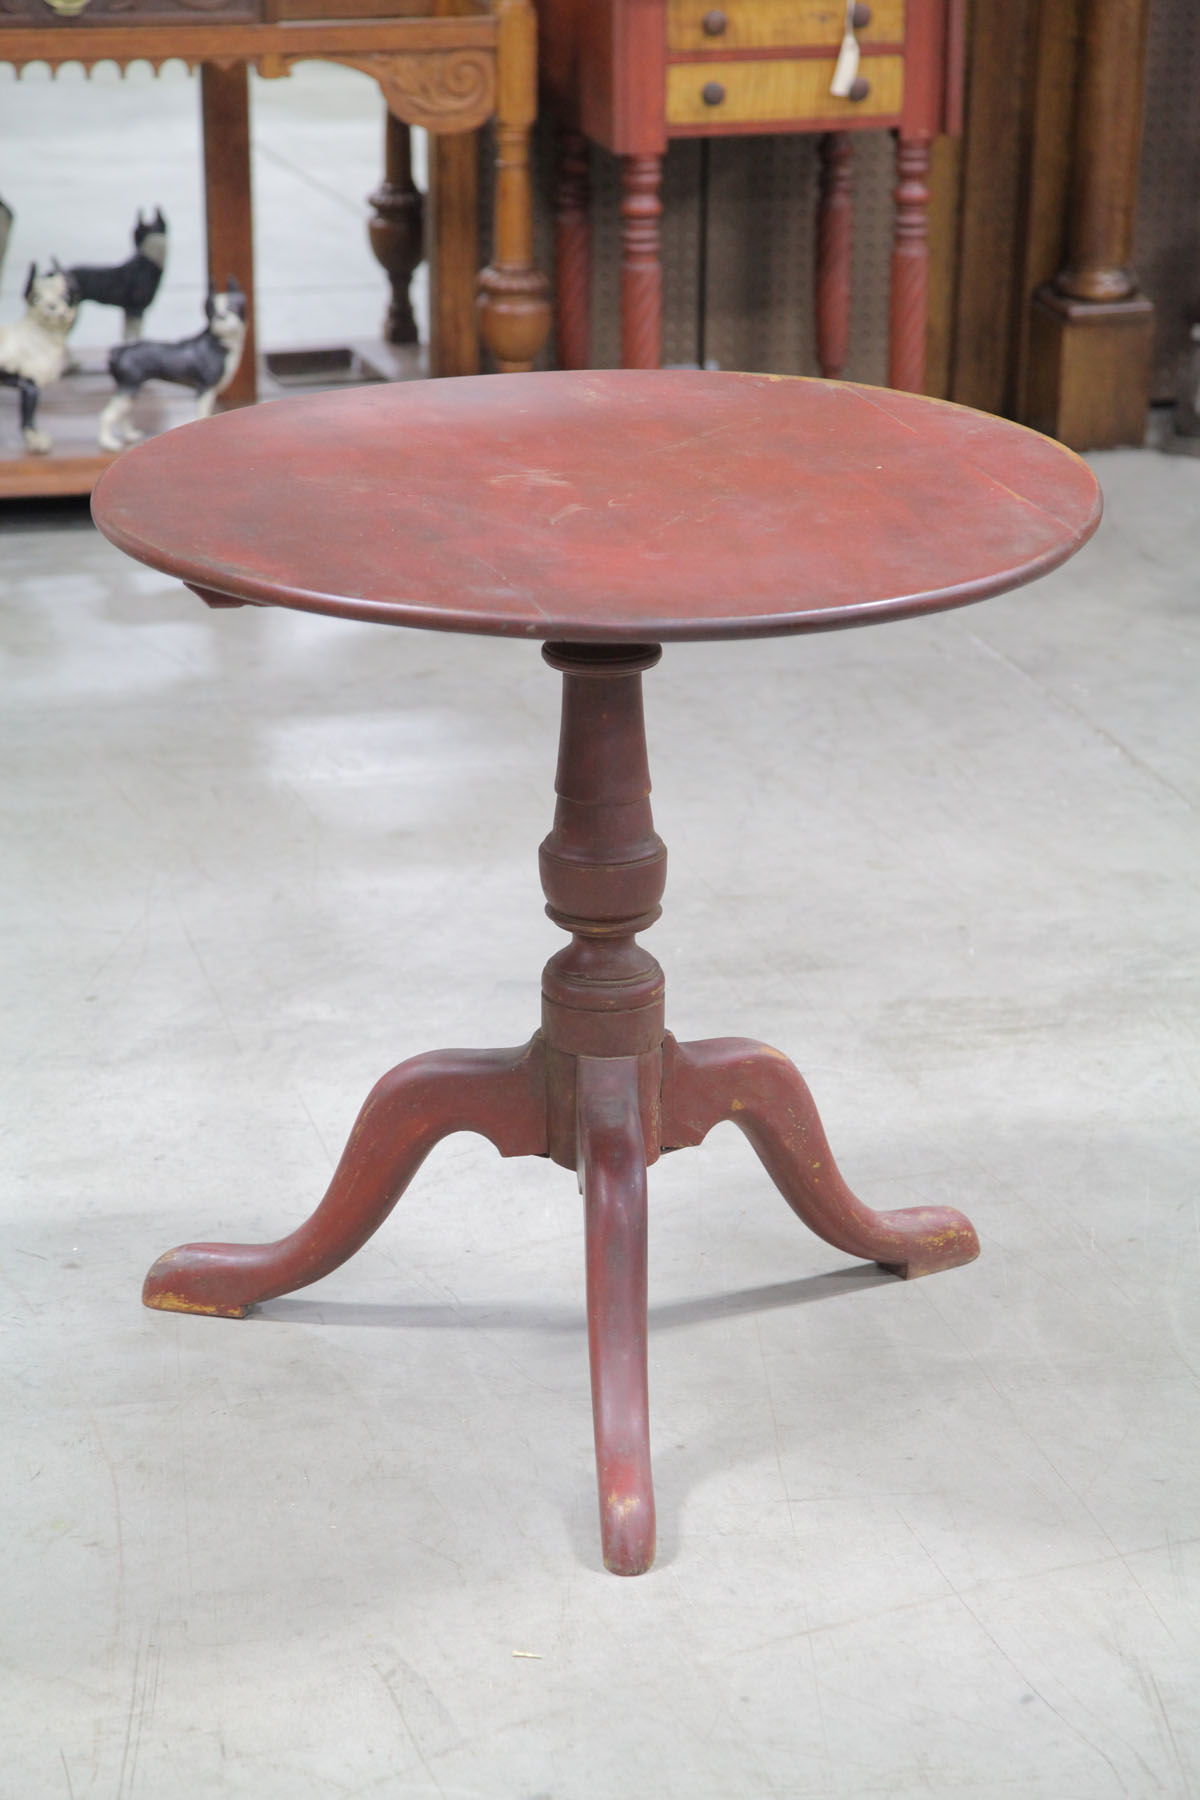 TILT TOP TABLE.  Purportedly from